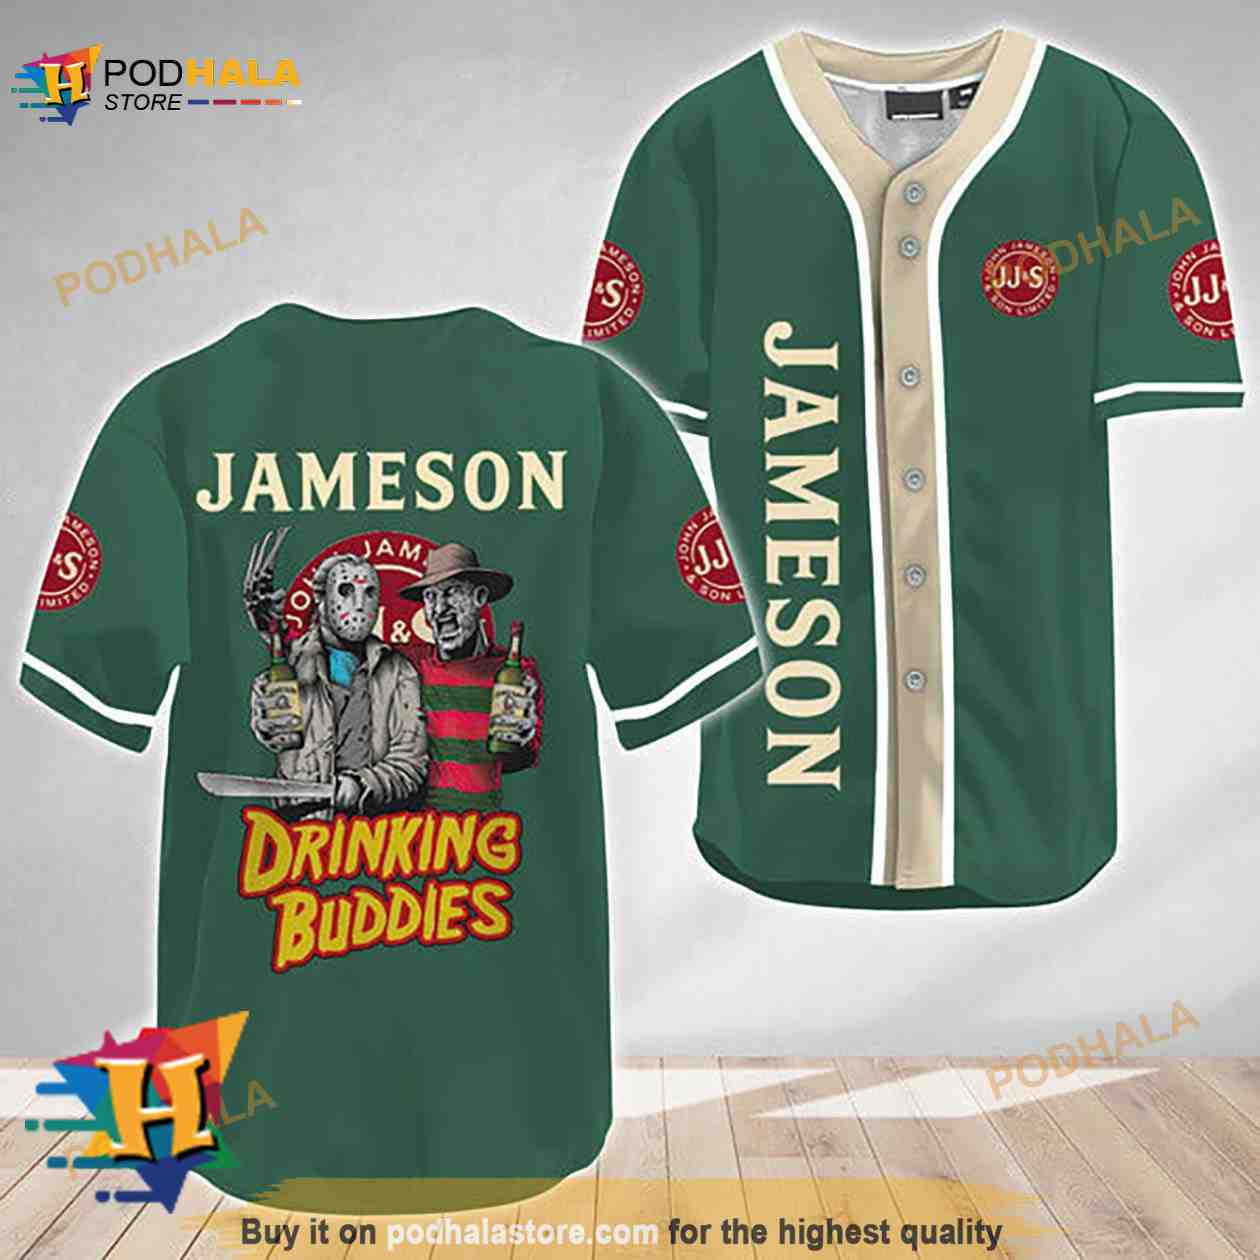 AVAILABLE Mexican Drinking Team Baseball Jersey